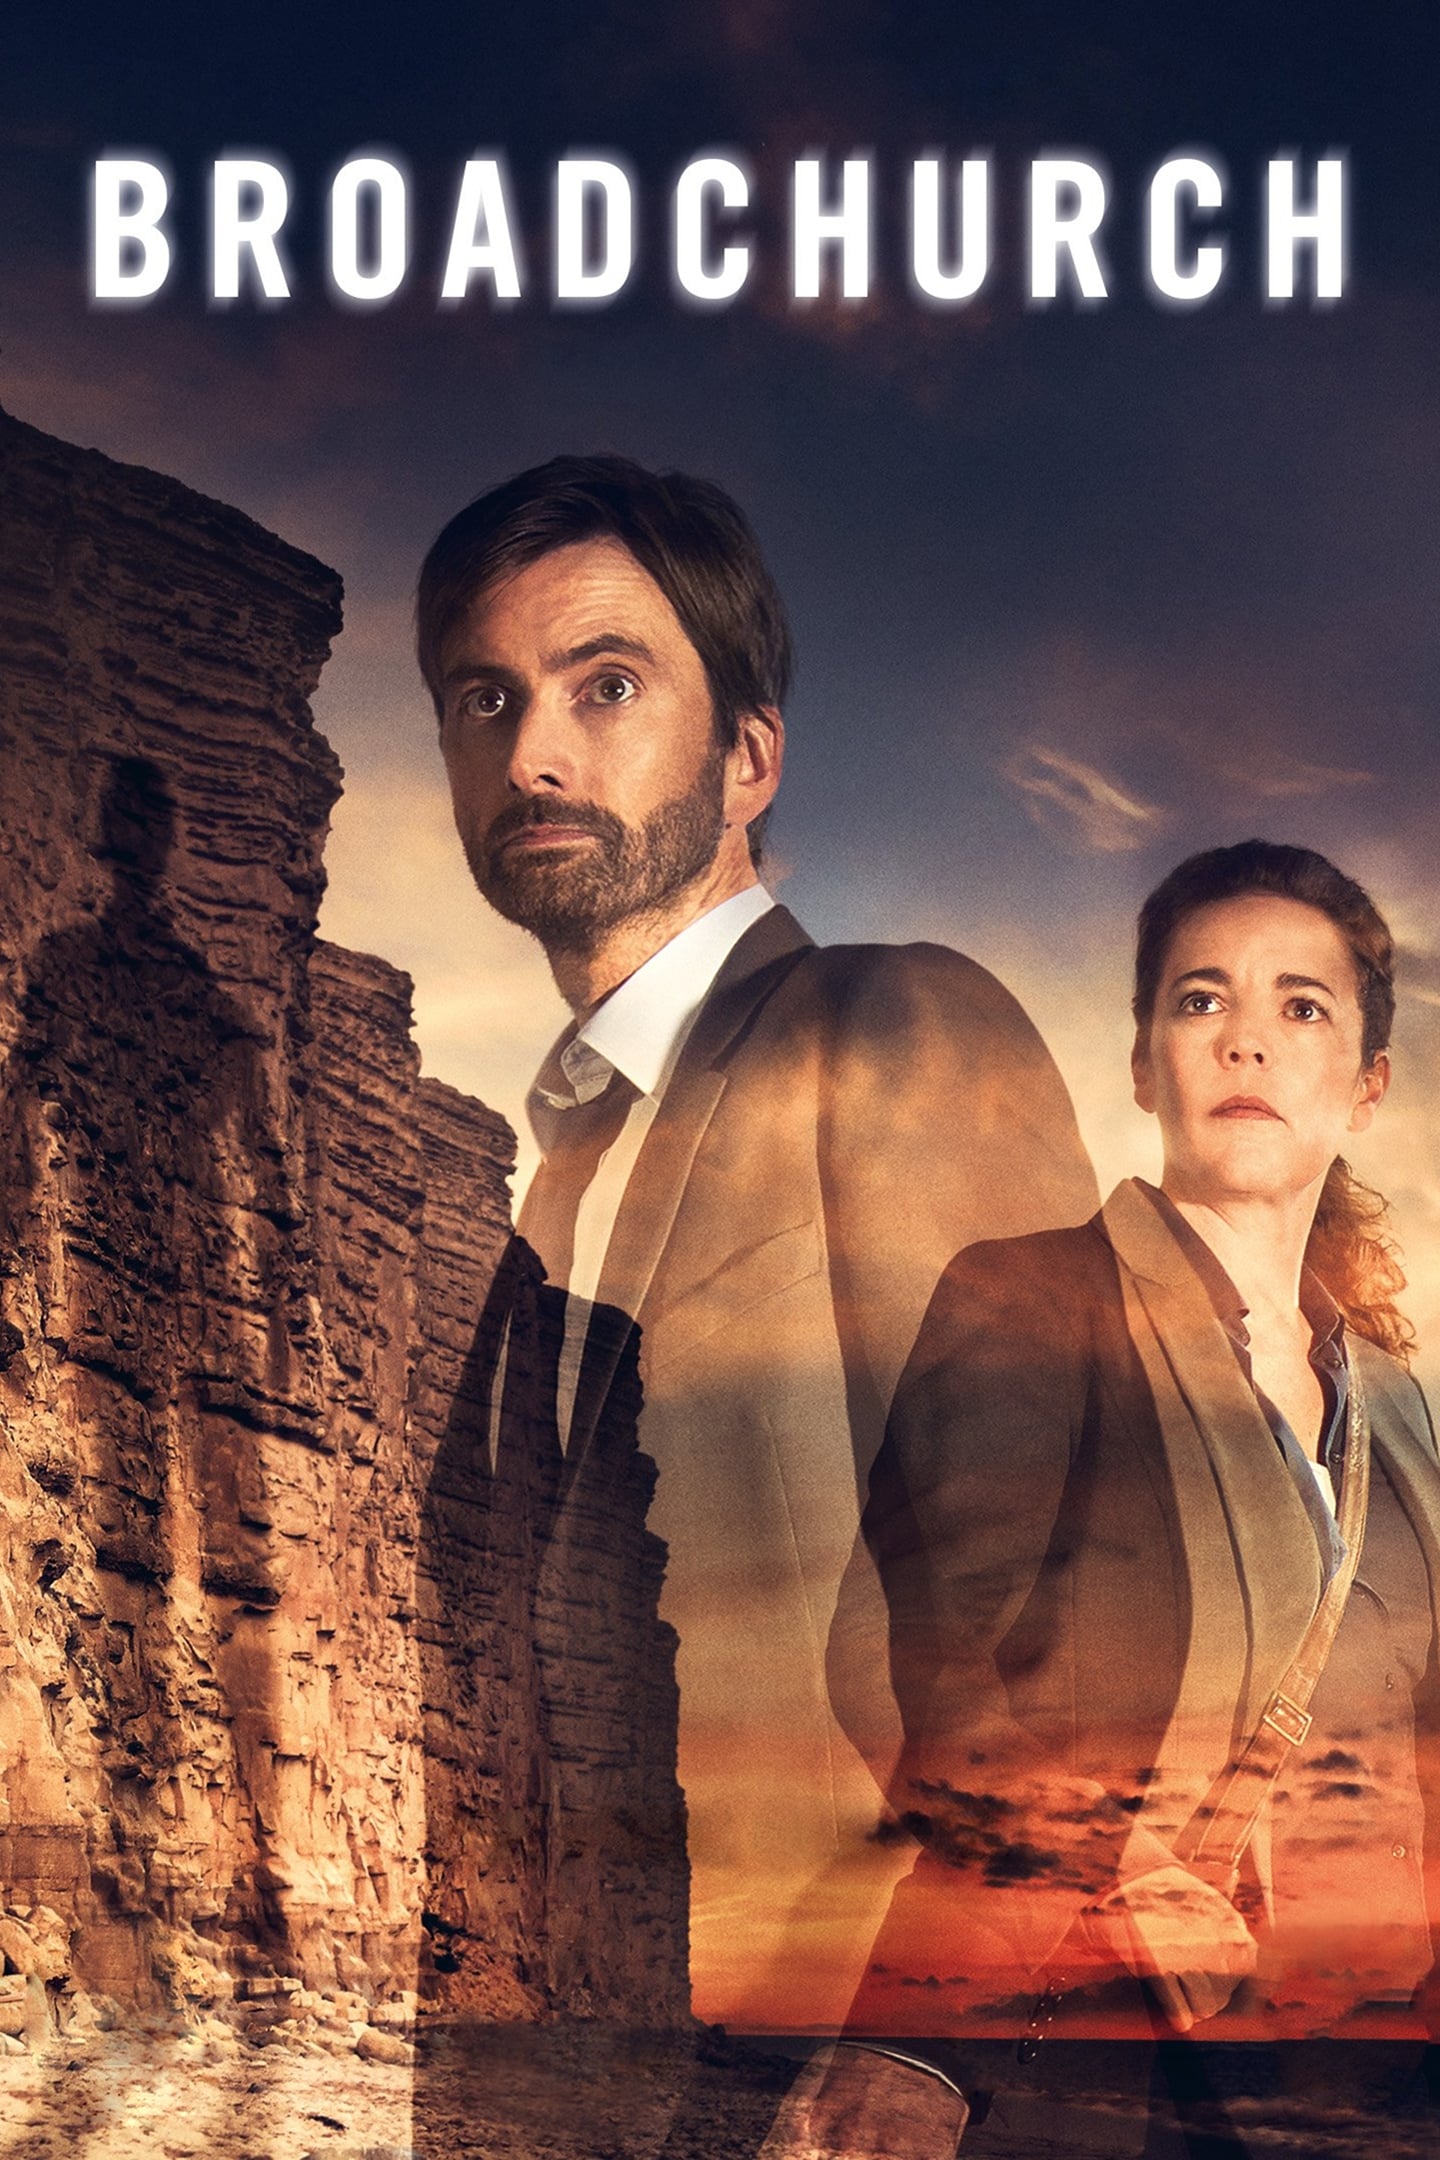 Broadchurch TV Shows About Procedural